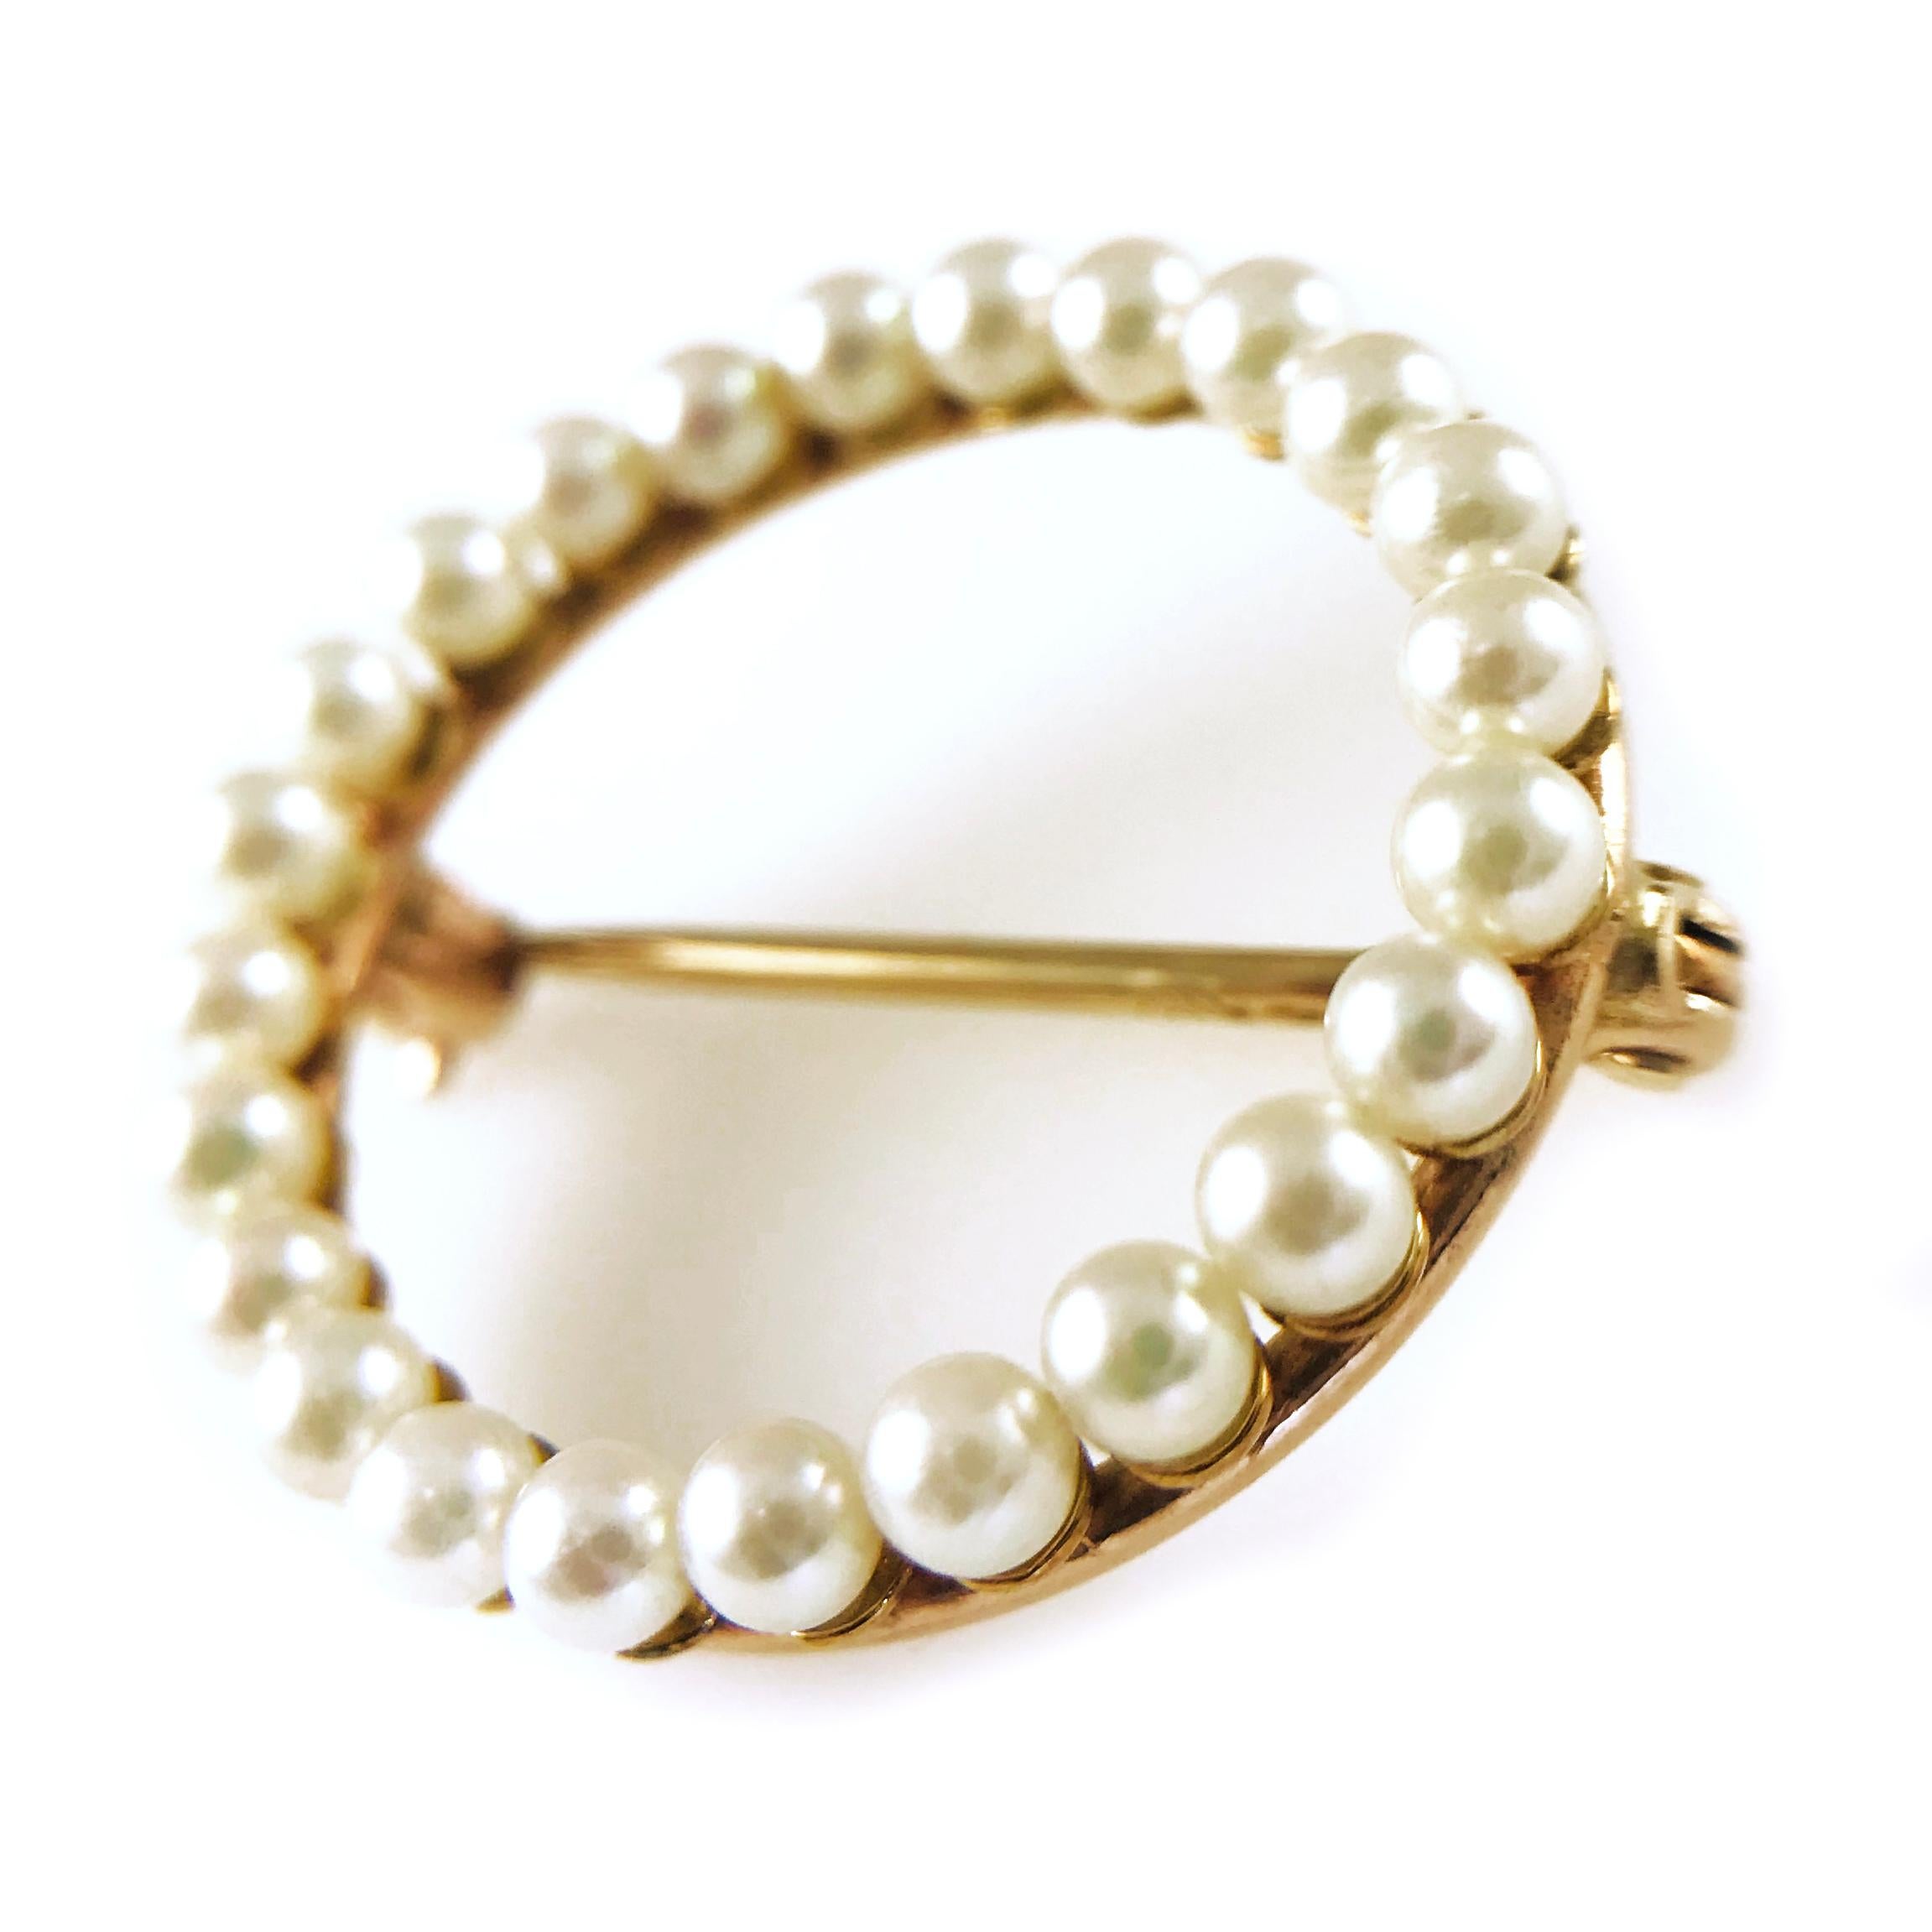 Victorian 14 Karat Yellow Gold Ring of Pearls Pin. Delicate and dainty 3mm pearls set in a circle for a simple yet elegant design. The size of pin pendant is approximately 24mm in diameter. Stamped on the pin is 14K.